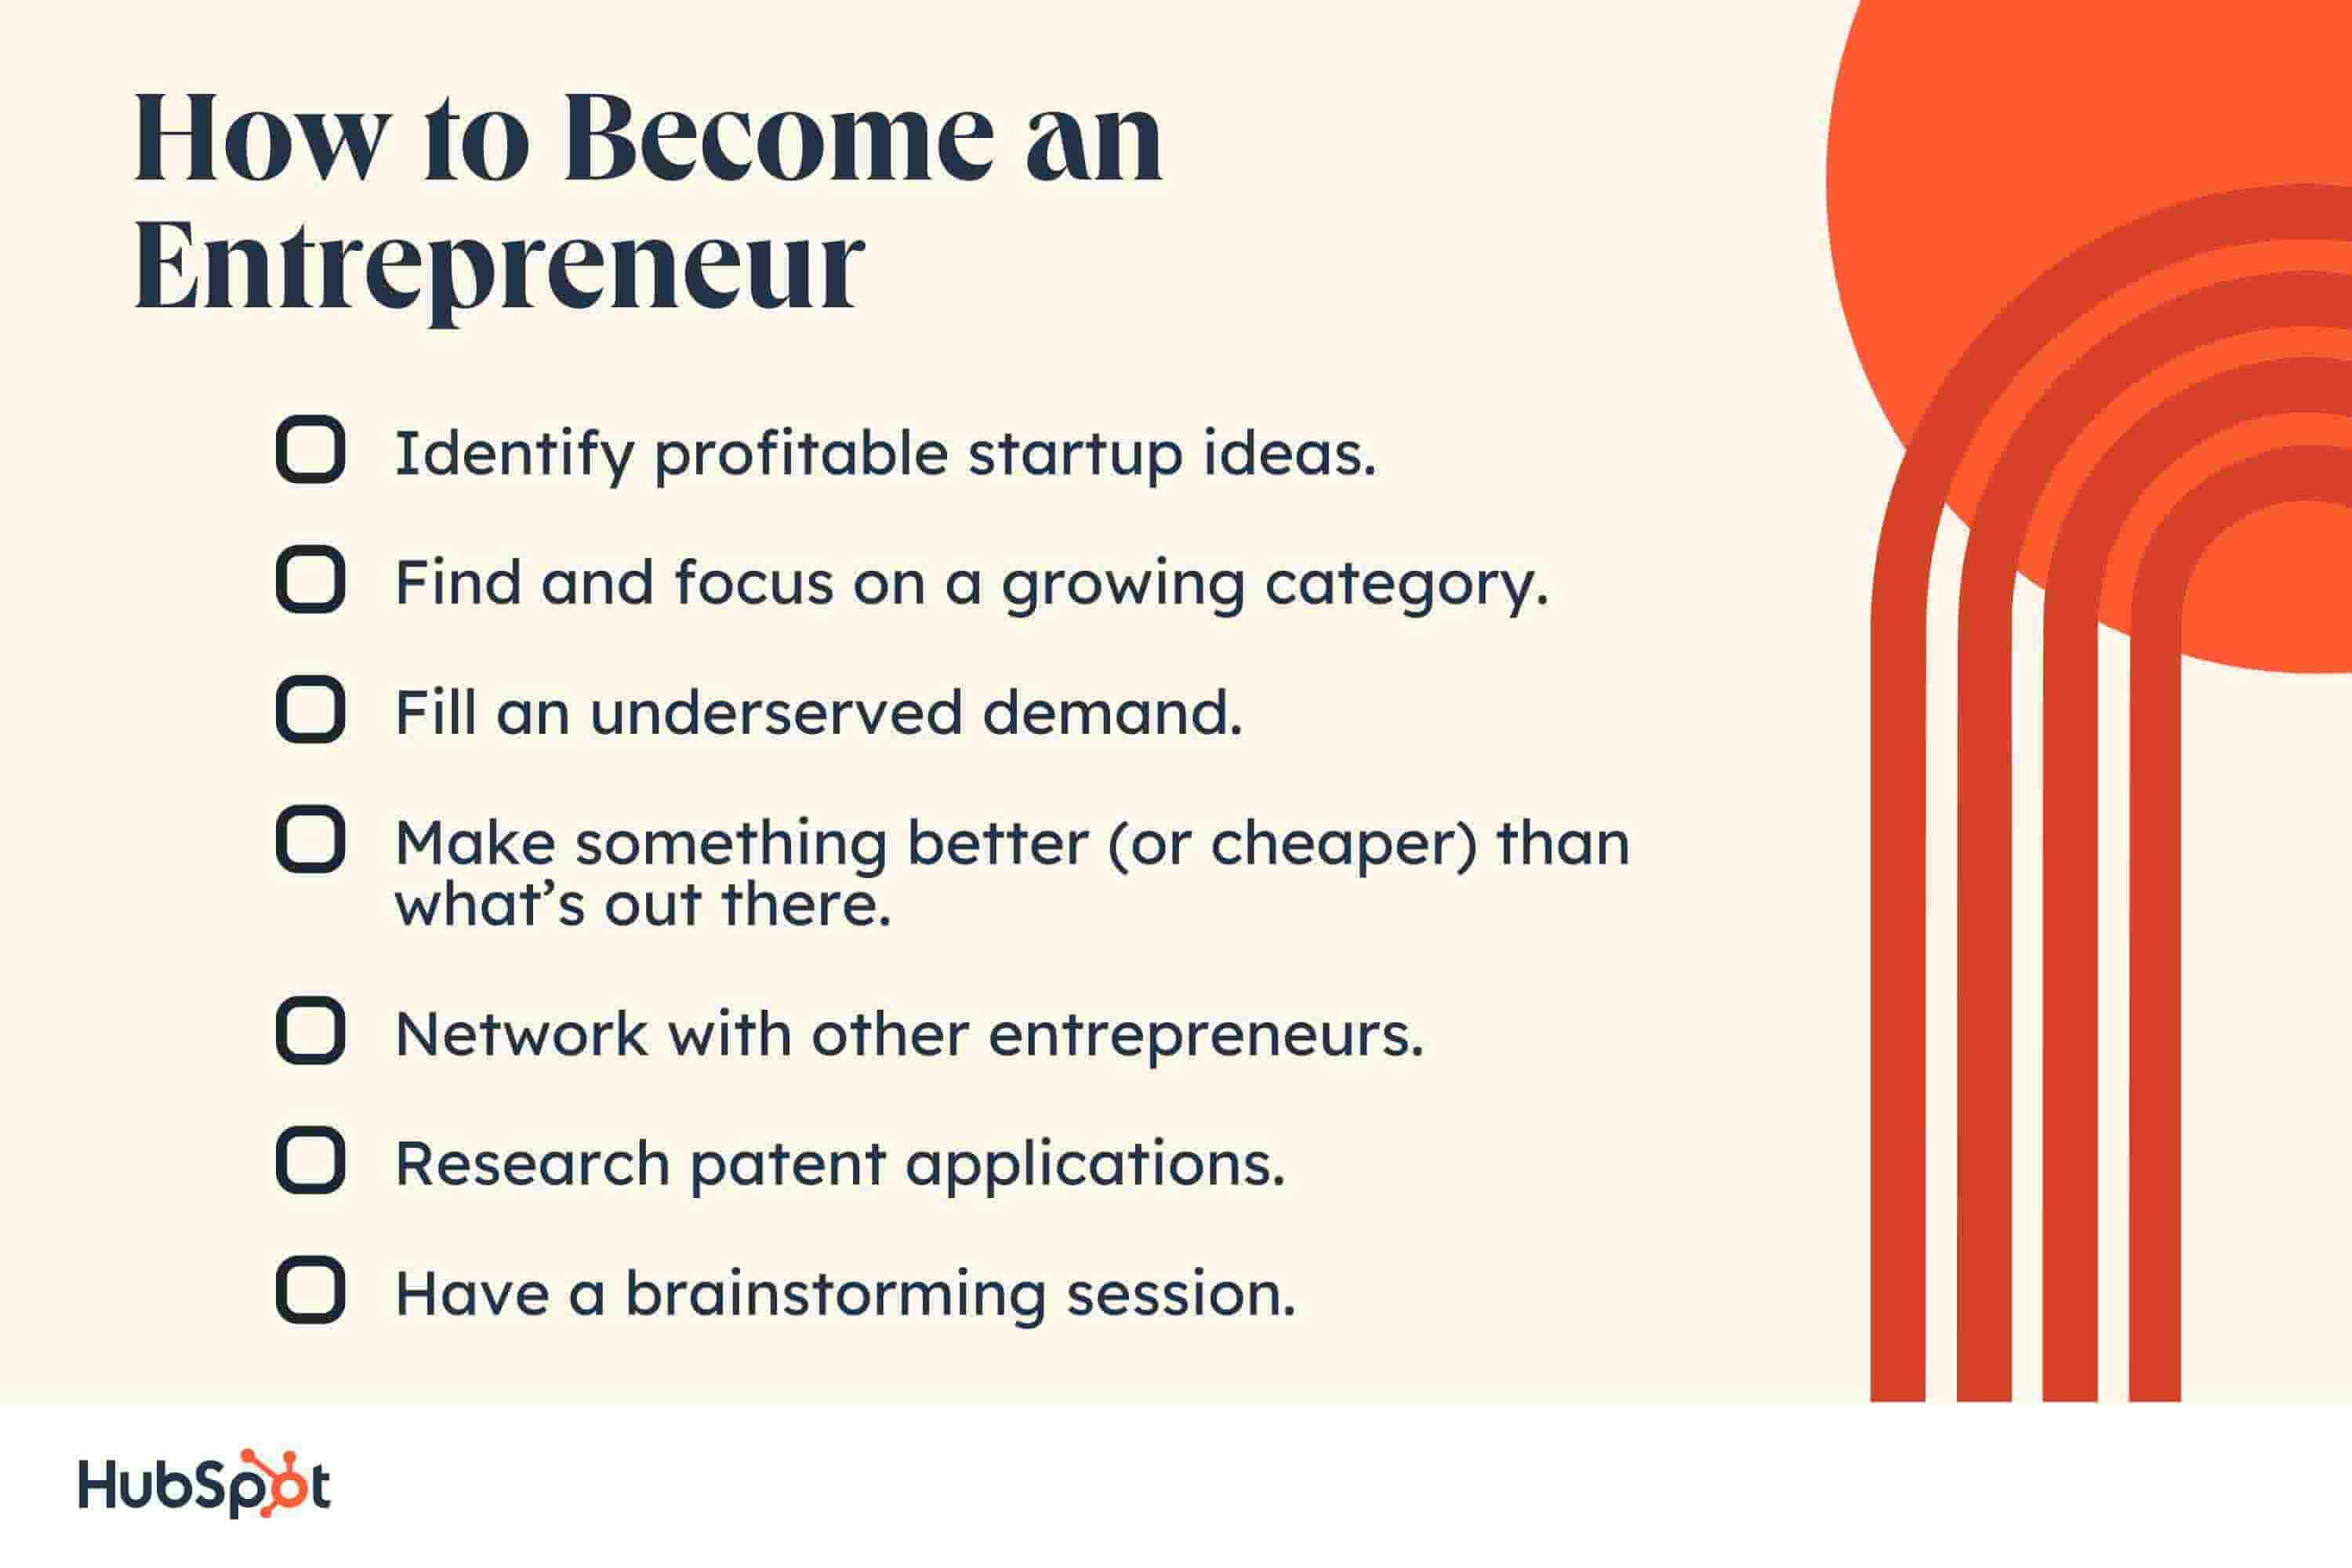 How to Become an Entrepreneur With No Money or Experience